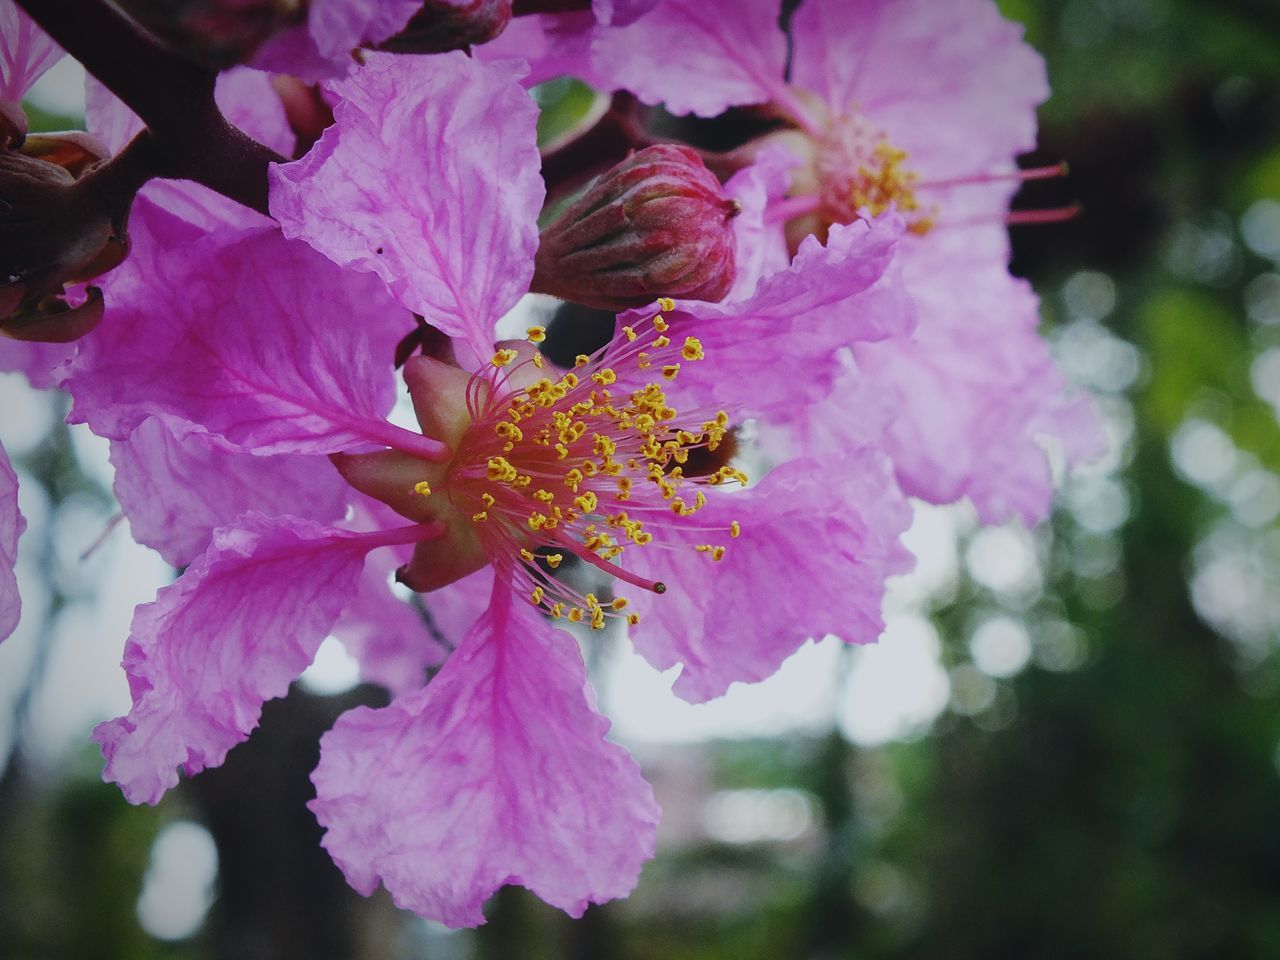 flower, flowering plant, plant, beauty in nature, freshness, fragility, blossom, close-up, petal, pink, flower head, growth, nature, inflorescence, macro photography, springtime, pollen, no people, focus on foreground, outdoors, purple, botany, day, stamen, selective focus, tree, shrub